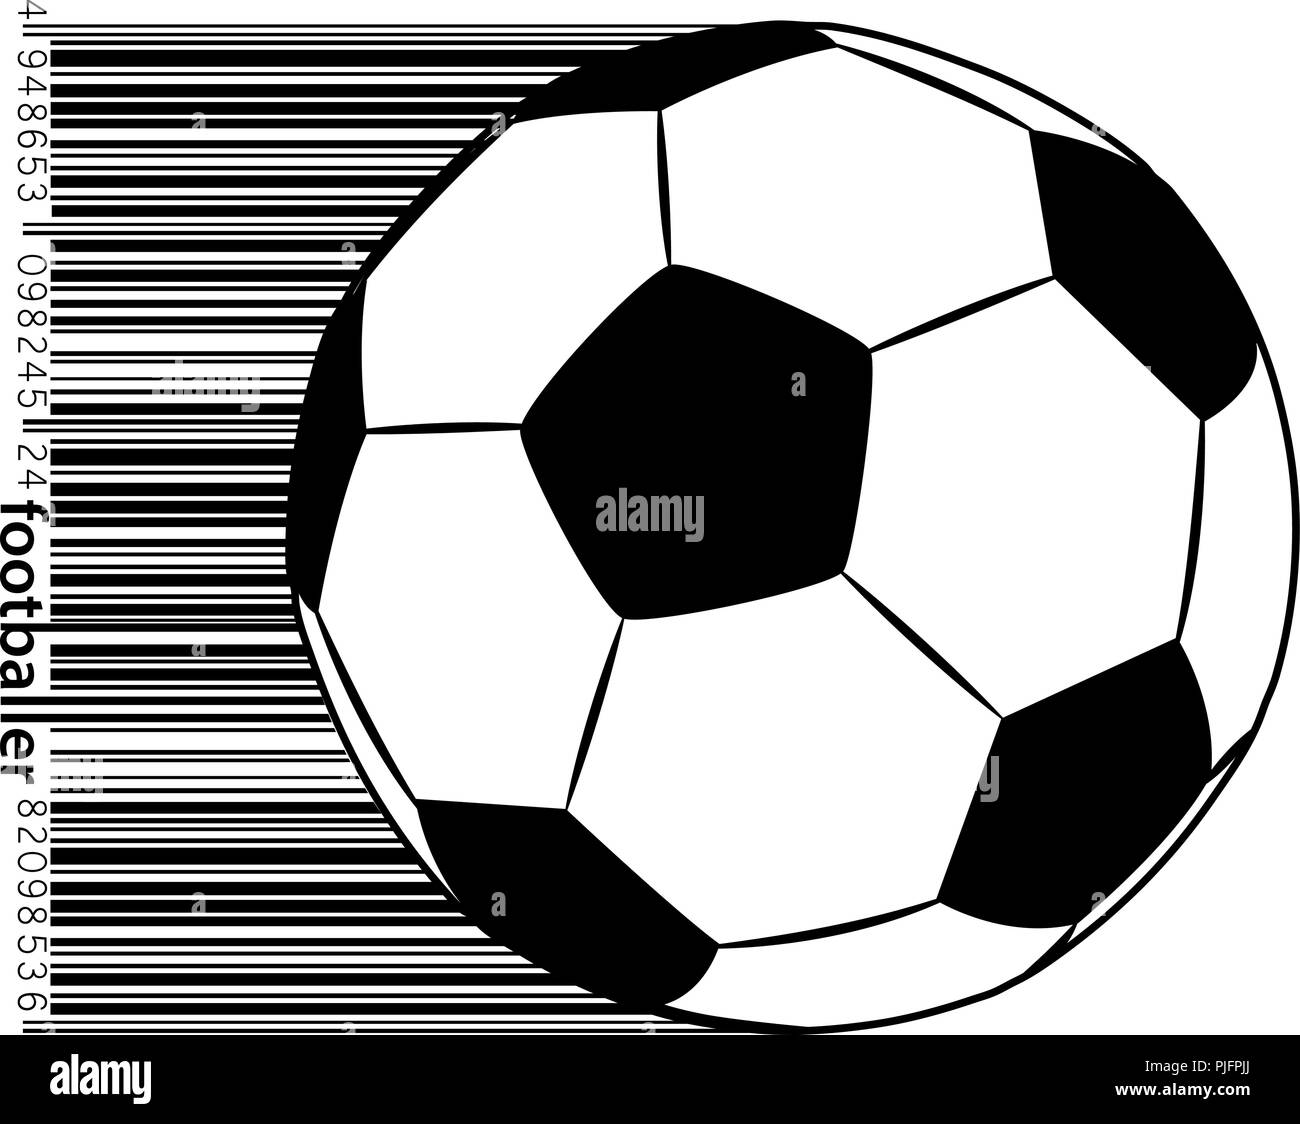 silhouette of a soccer ball. Text and background on a separate layer, color can be changed in one click. Stock Vector